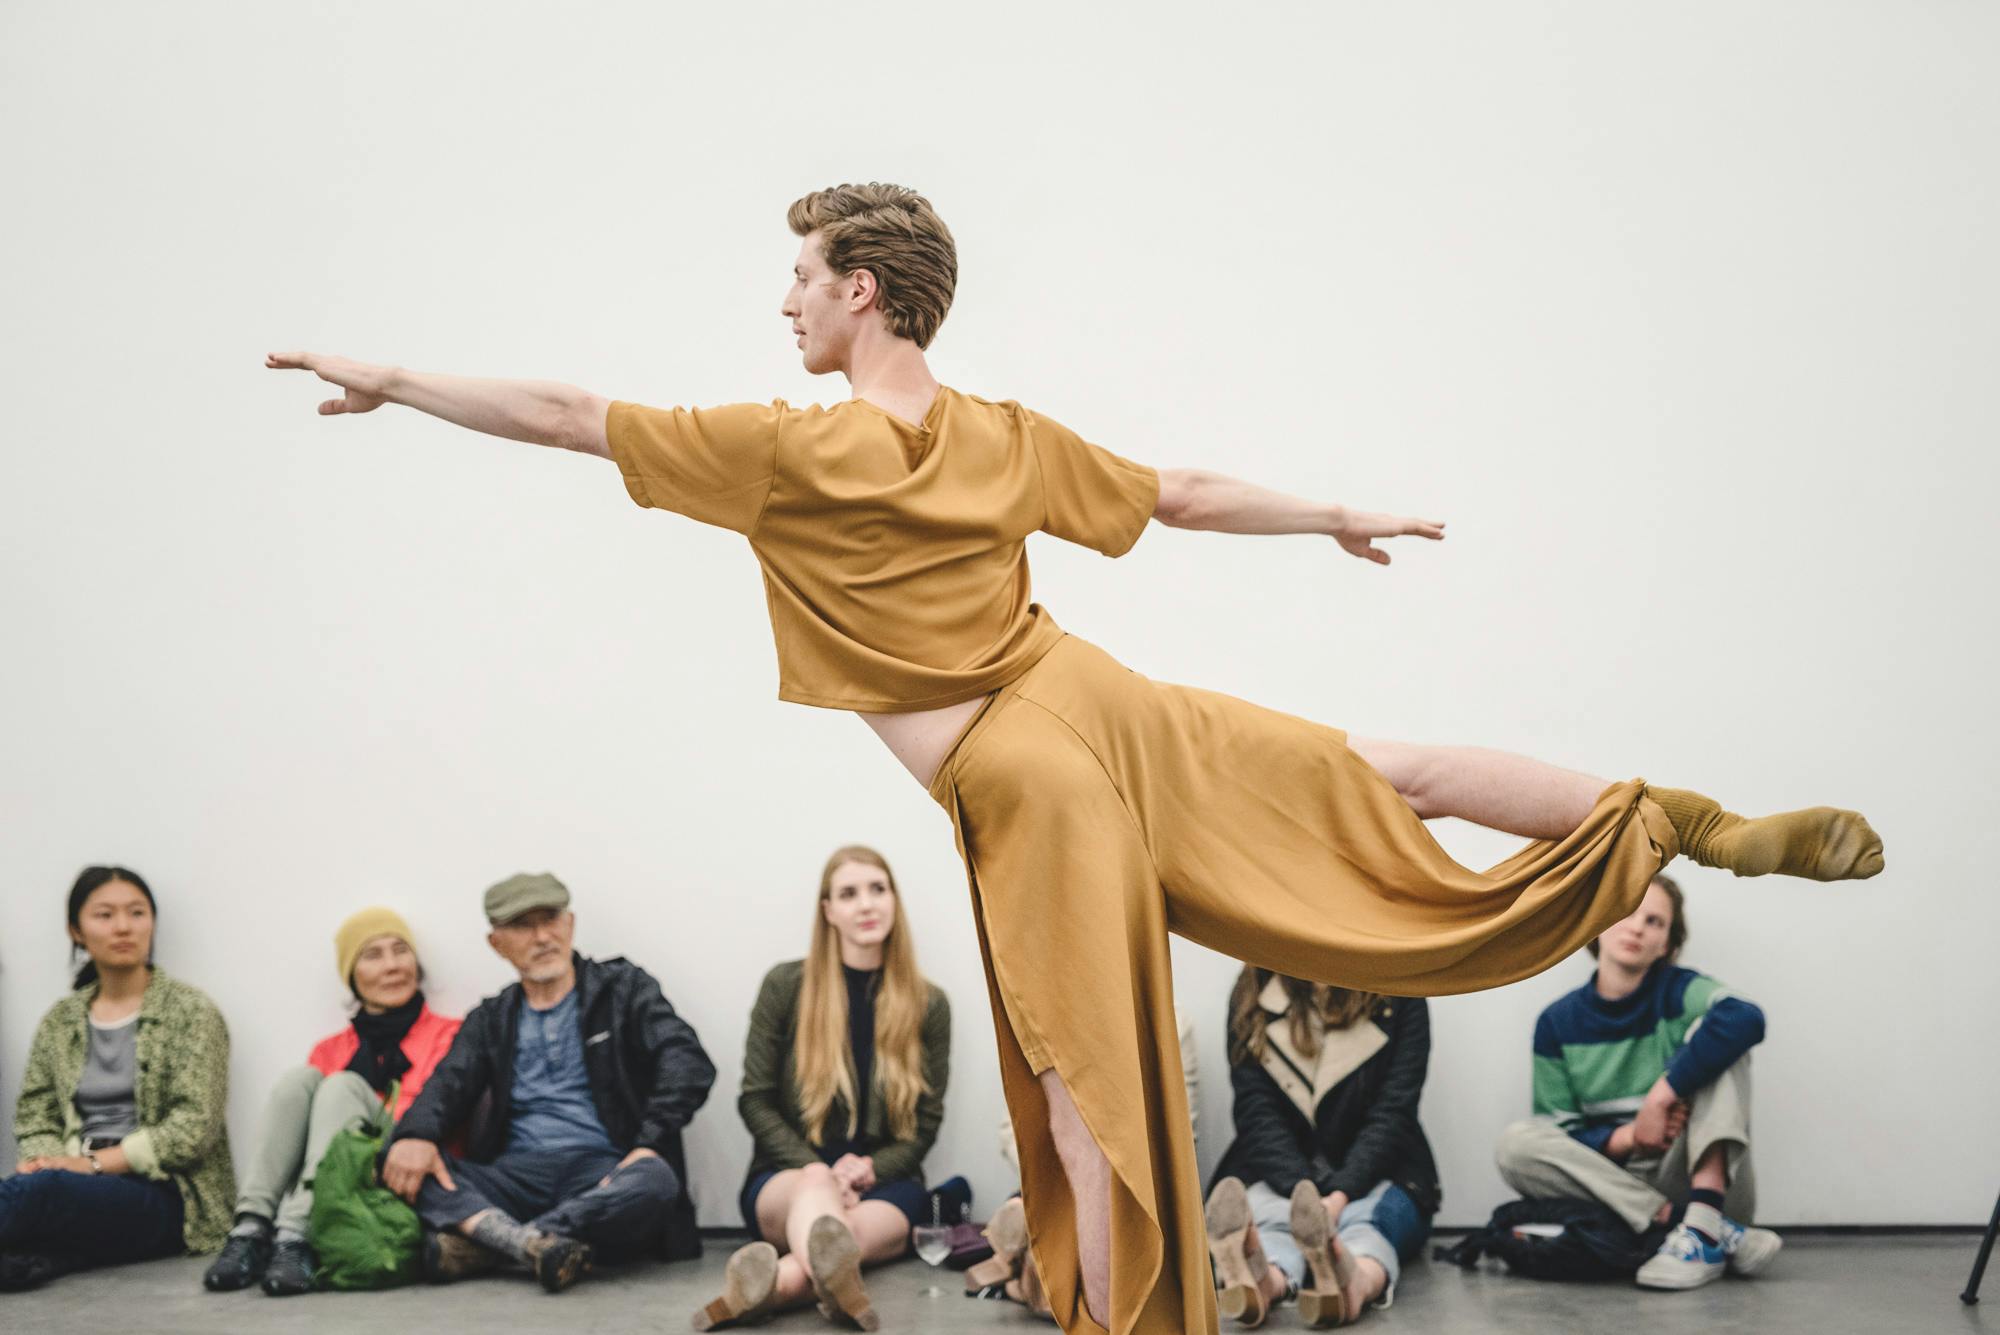 Andrew Bartee, wearing a mustard-coloured outfit is performing for an audience seated on the floor against a gallery wall.